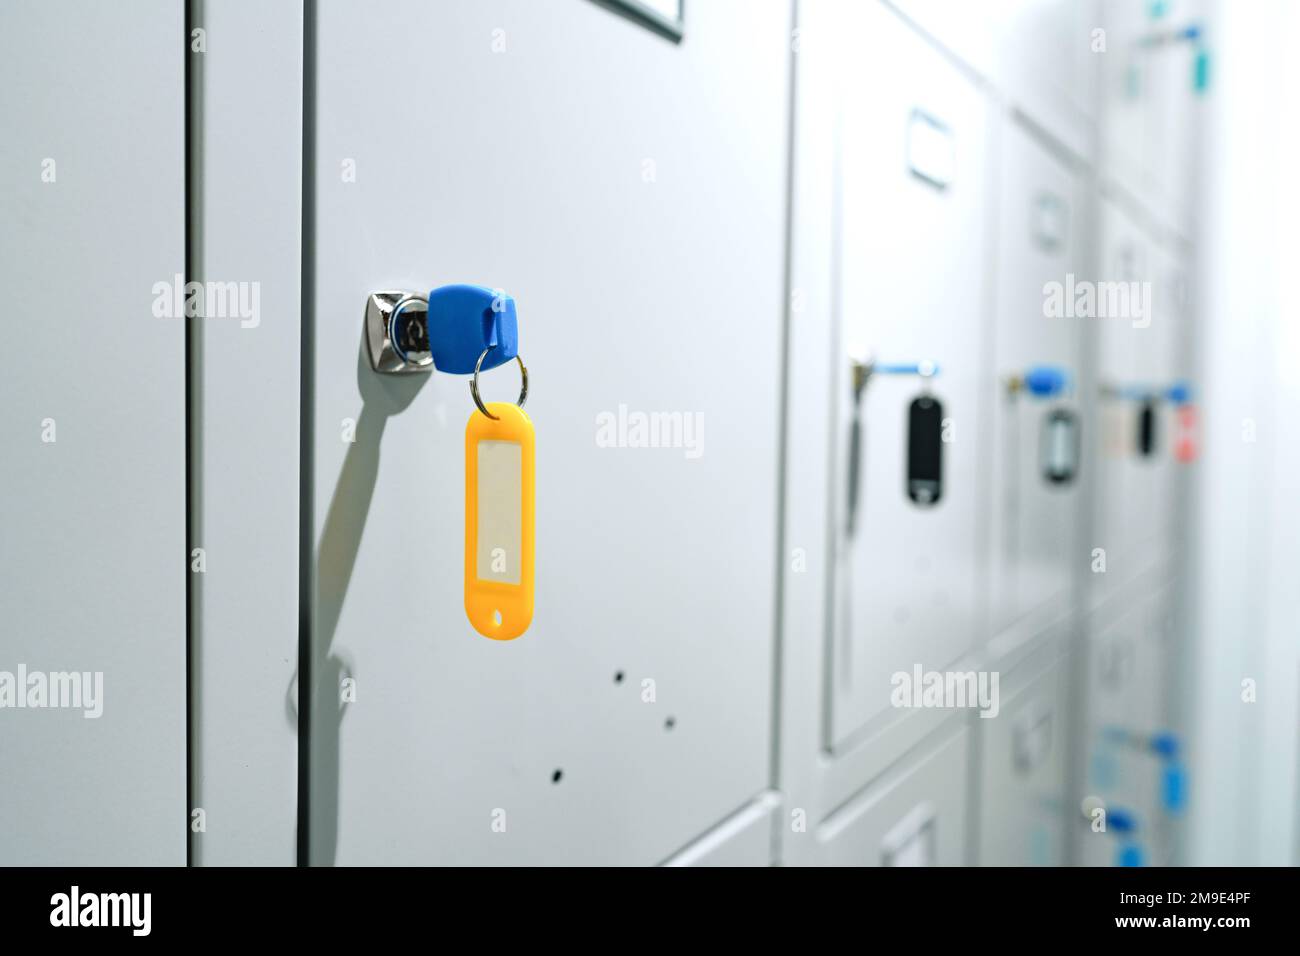 Gray locker with key for safety in public facility Stock Photo